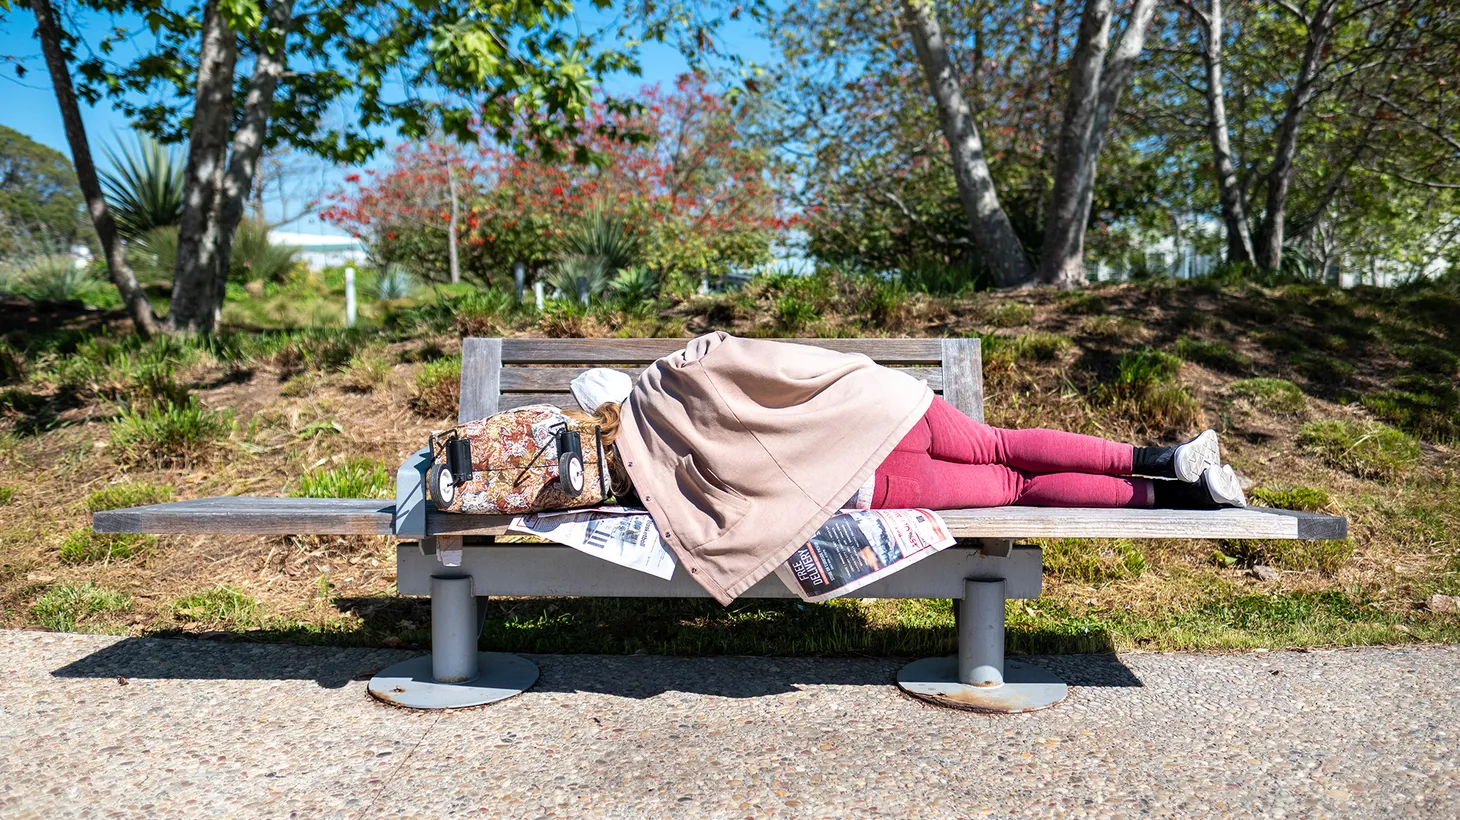 An unhoused person sleeps on a bench in Tongva Park, Santa Monica, CA, February 25, 2022.